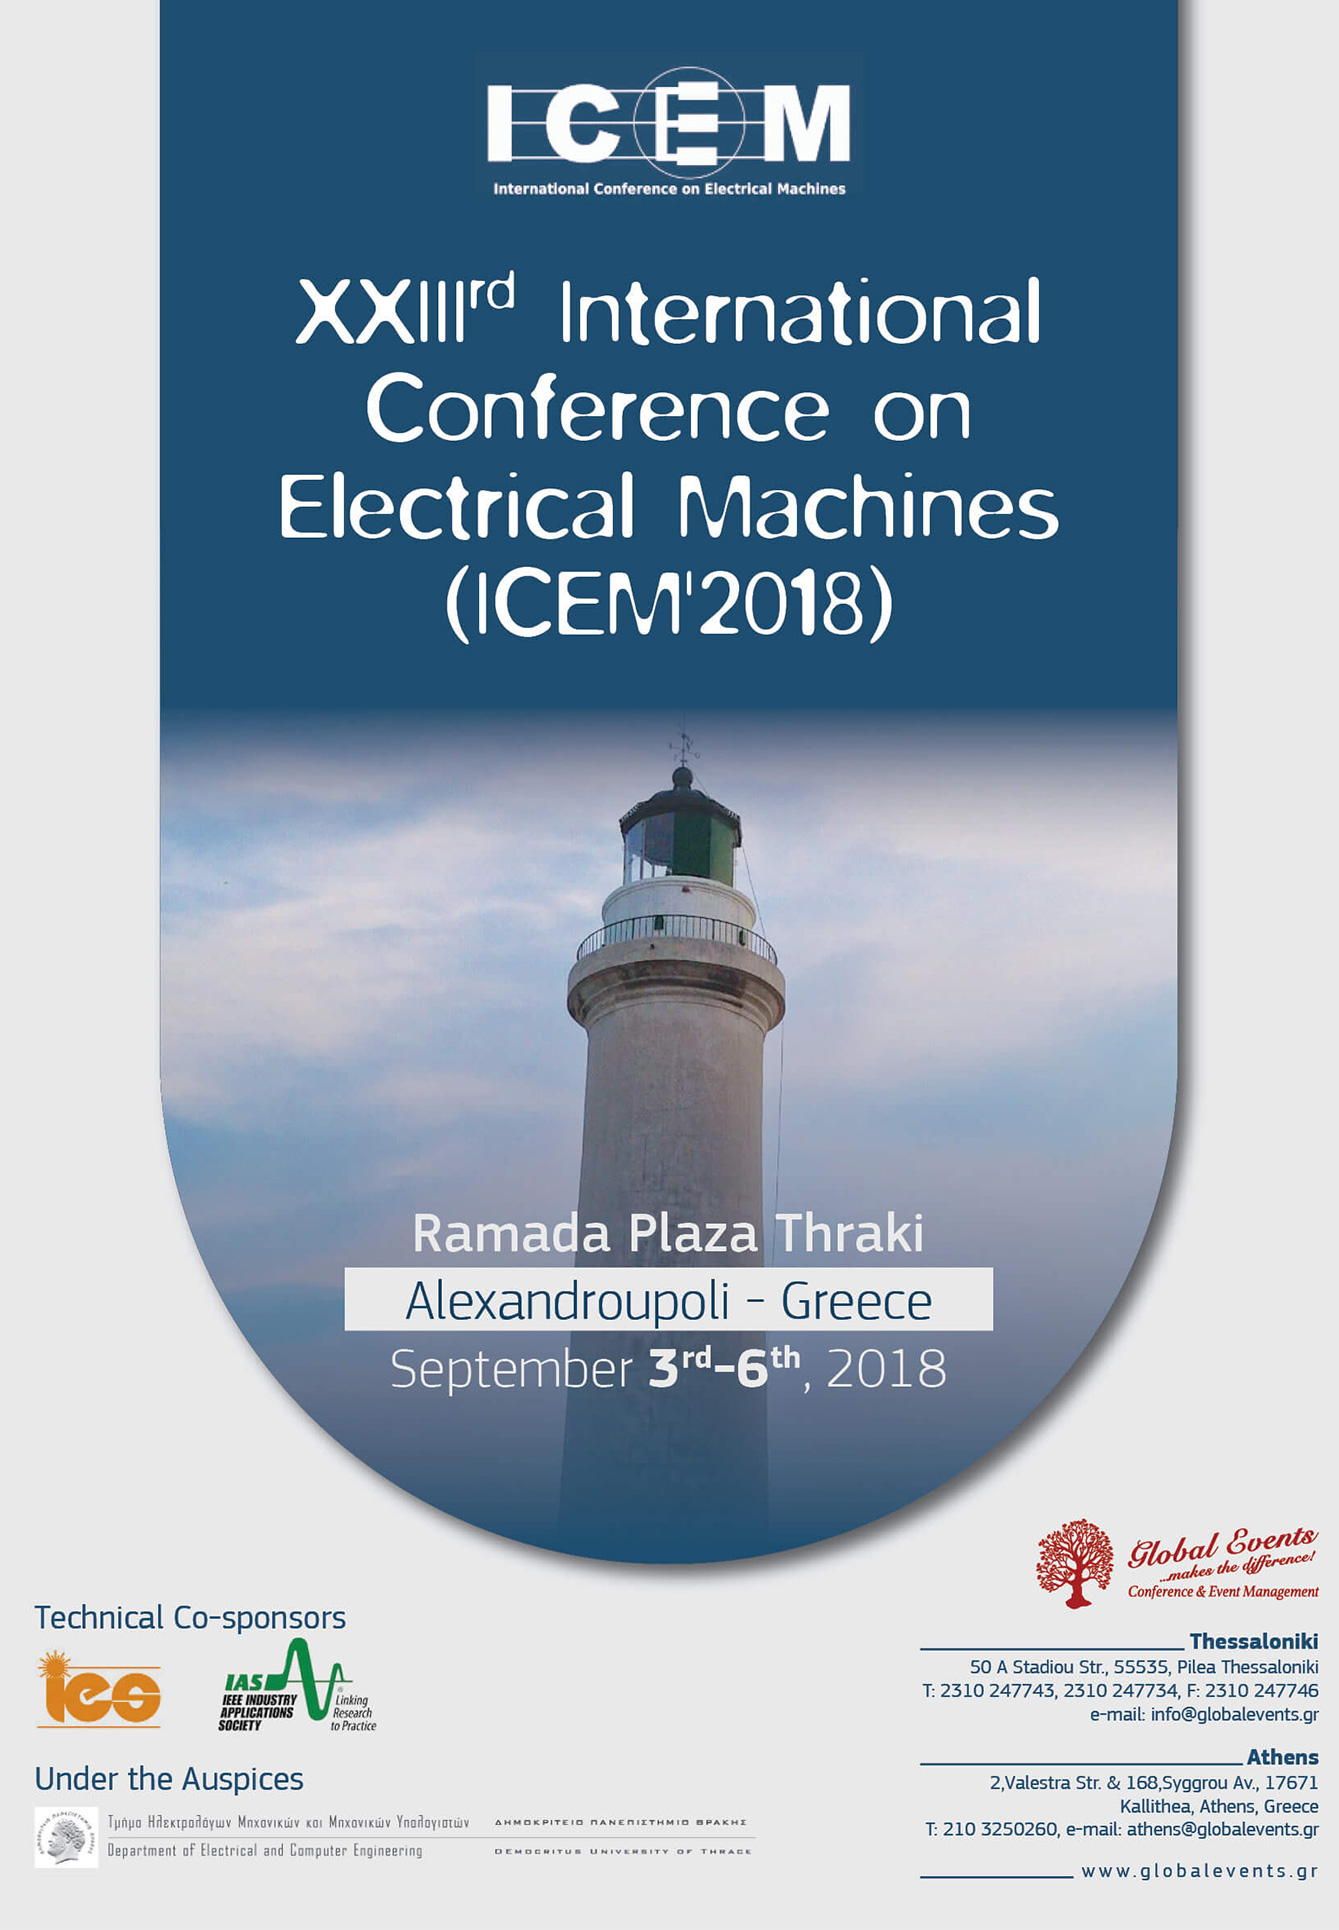 XXIIIrd International Conference on Electrical Machines - ICEM2018